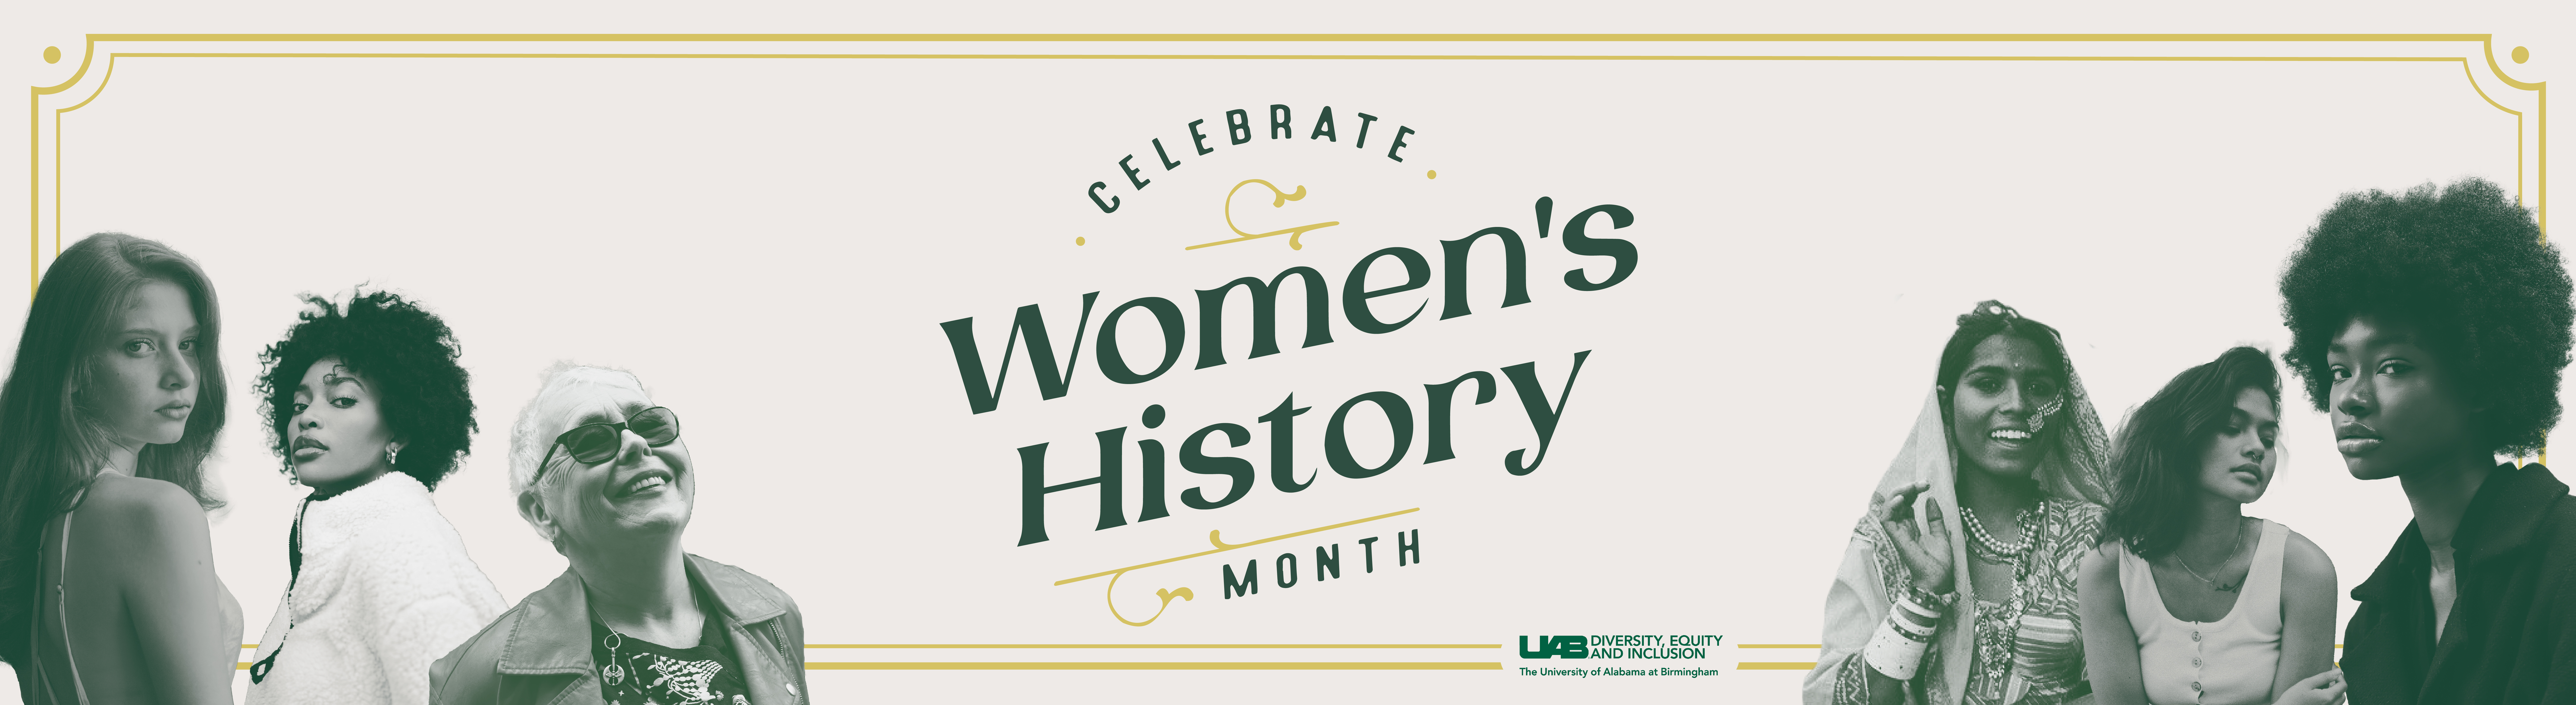 Womens History Month Version 2 11